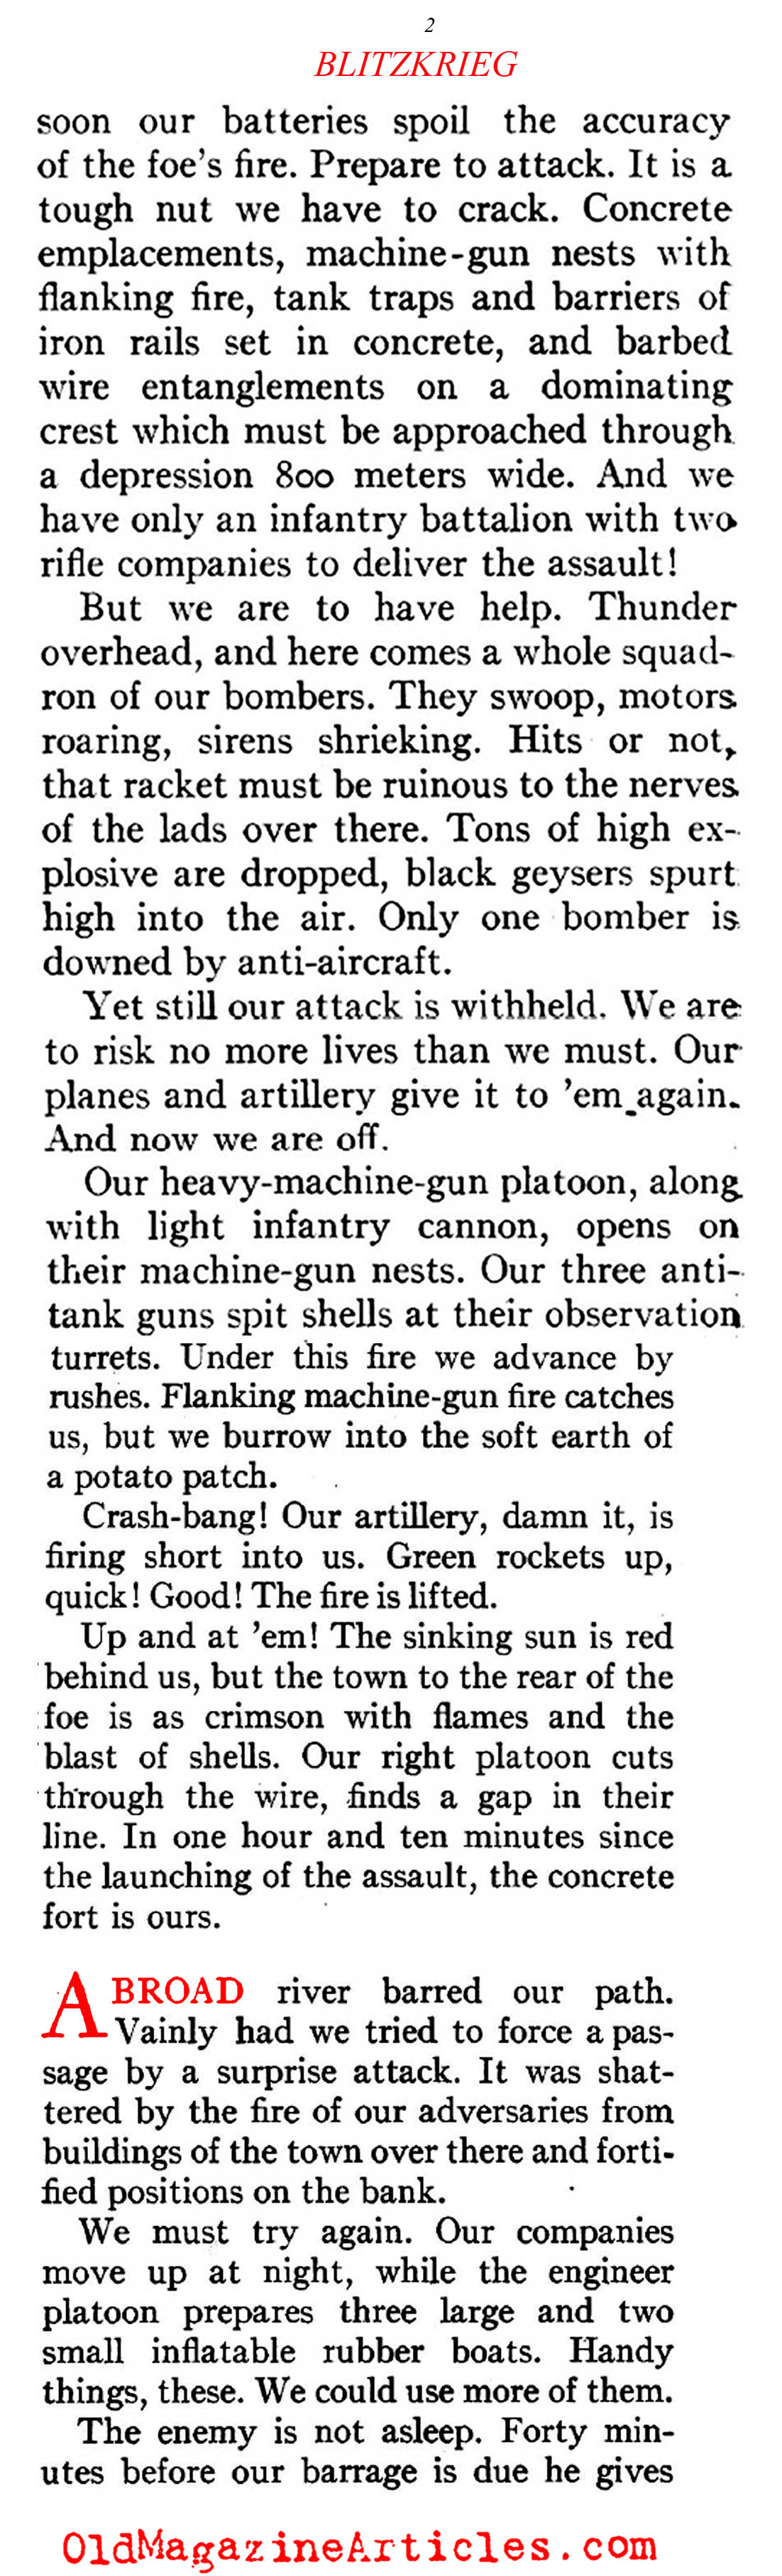 Blitzkrieg: In the Words of Nazi Officers   (American Legion Weekly, 1940)